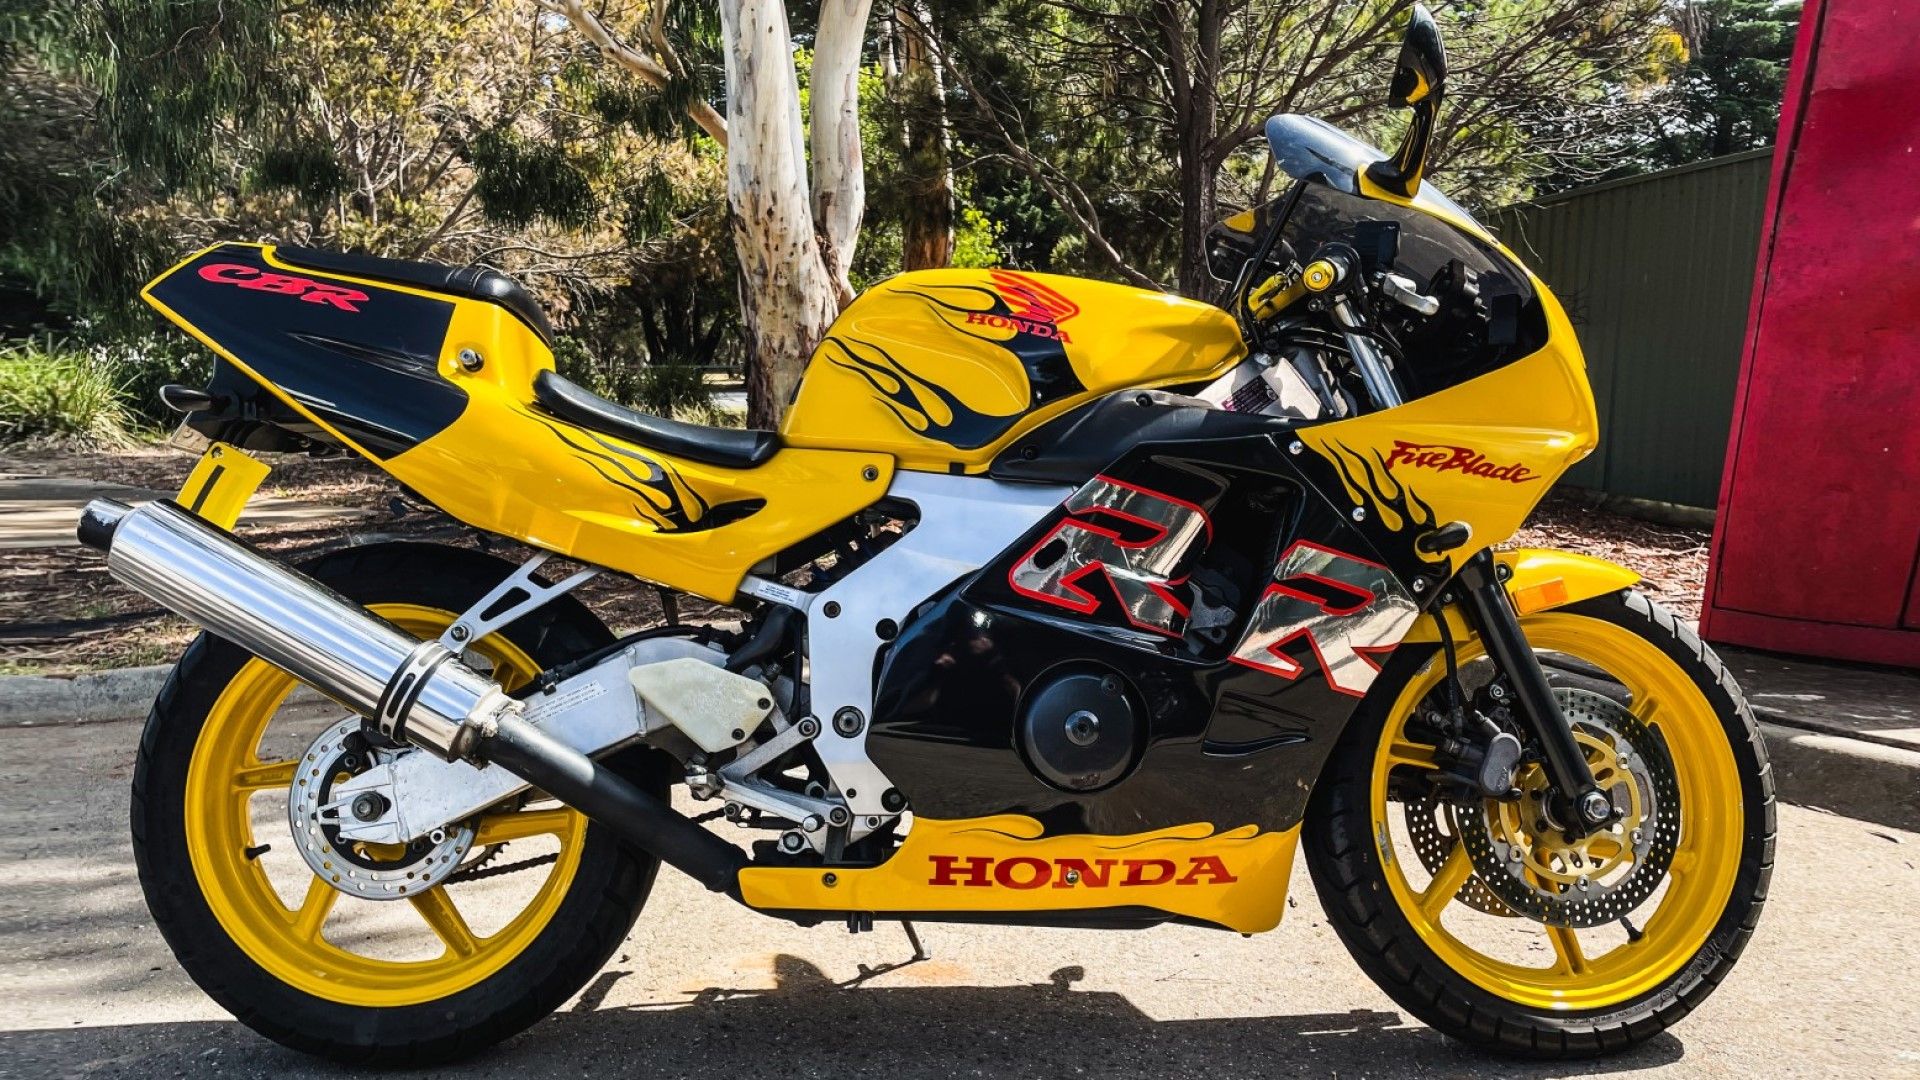 Remembering When Honda Made The Highest-Revving Motorcycle In The ‘90s